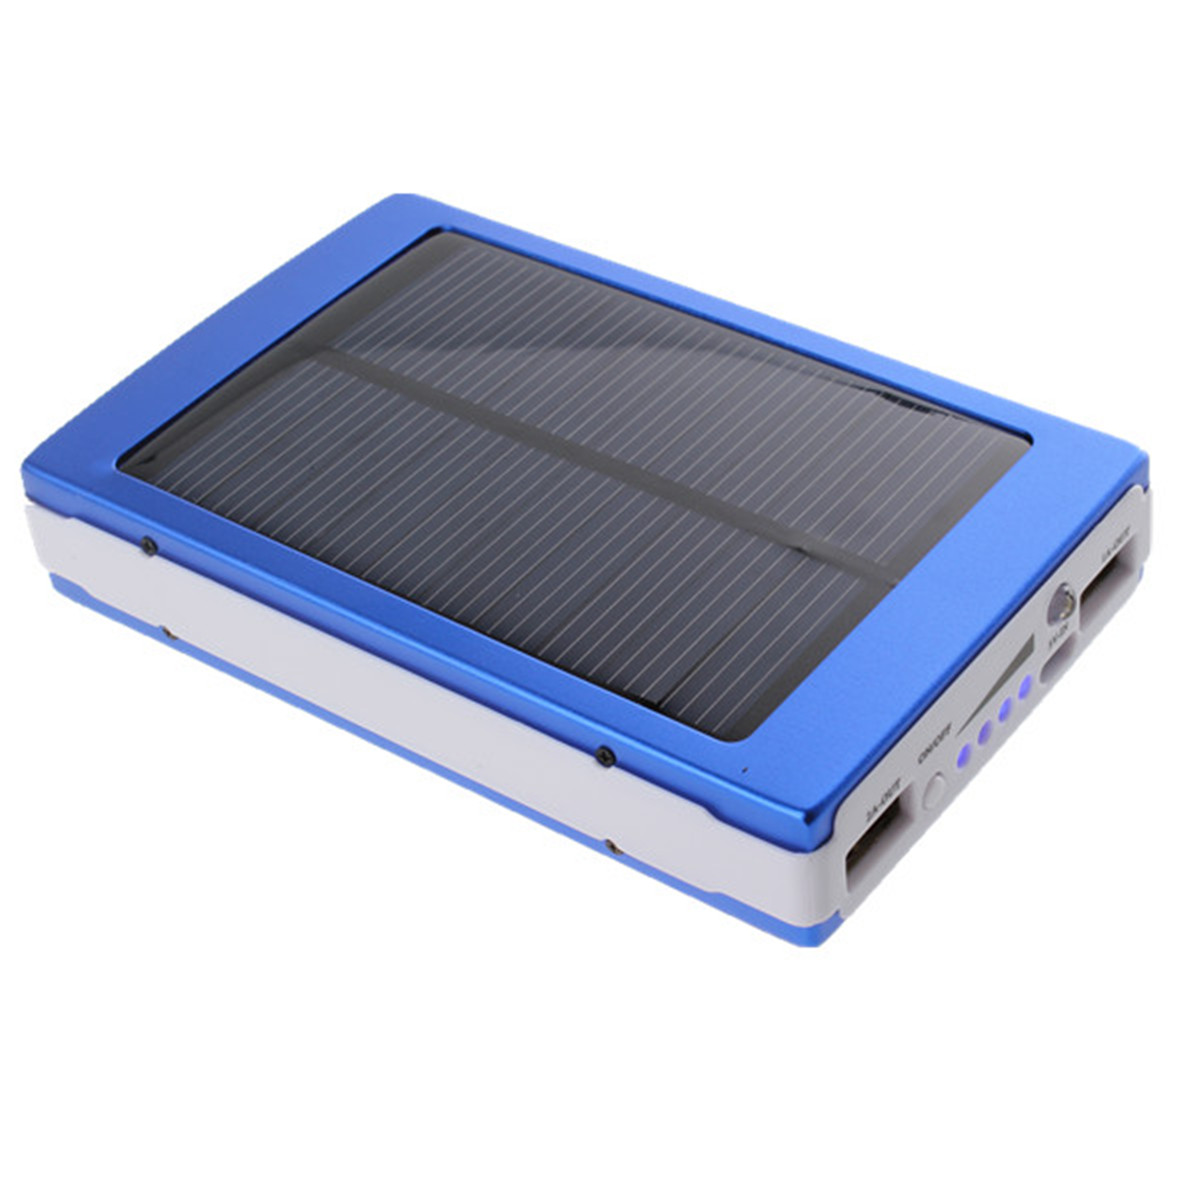 Portable-Solar-Panel-Dual-USB-External-Mobile-Battery-Power-Bank-Pack-Charger-for-iPhone-HTC-1419461-7